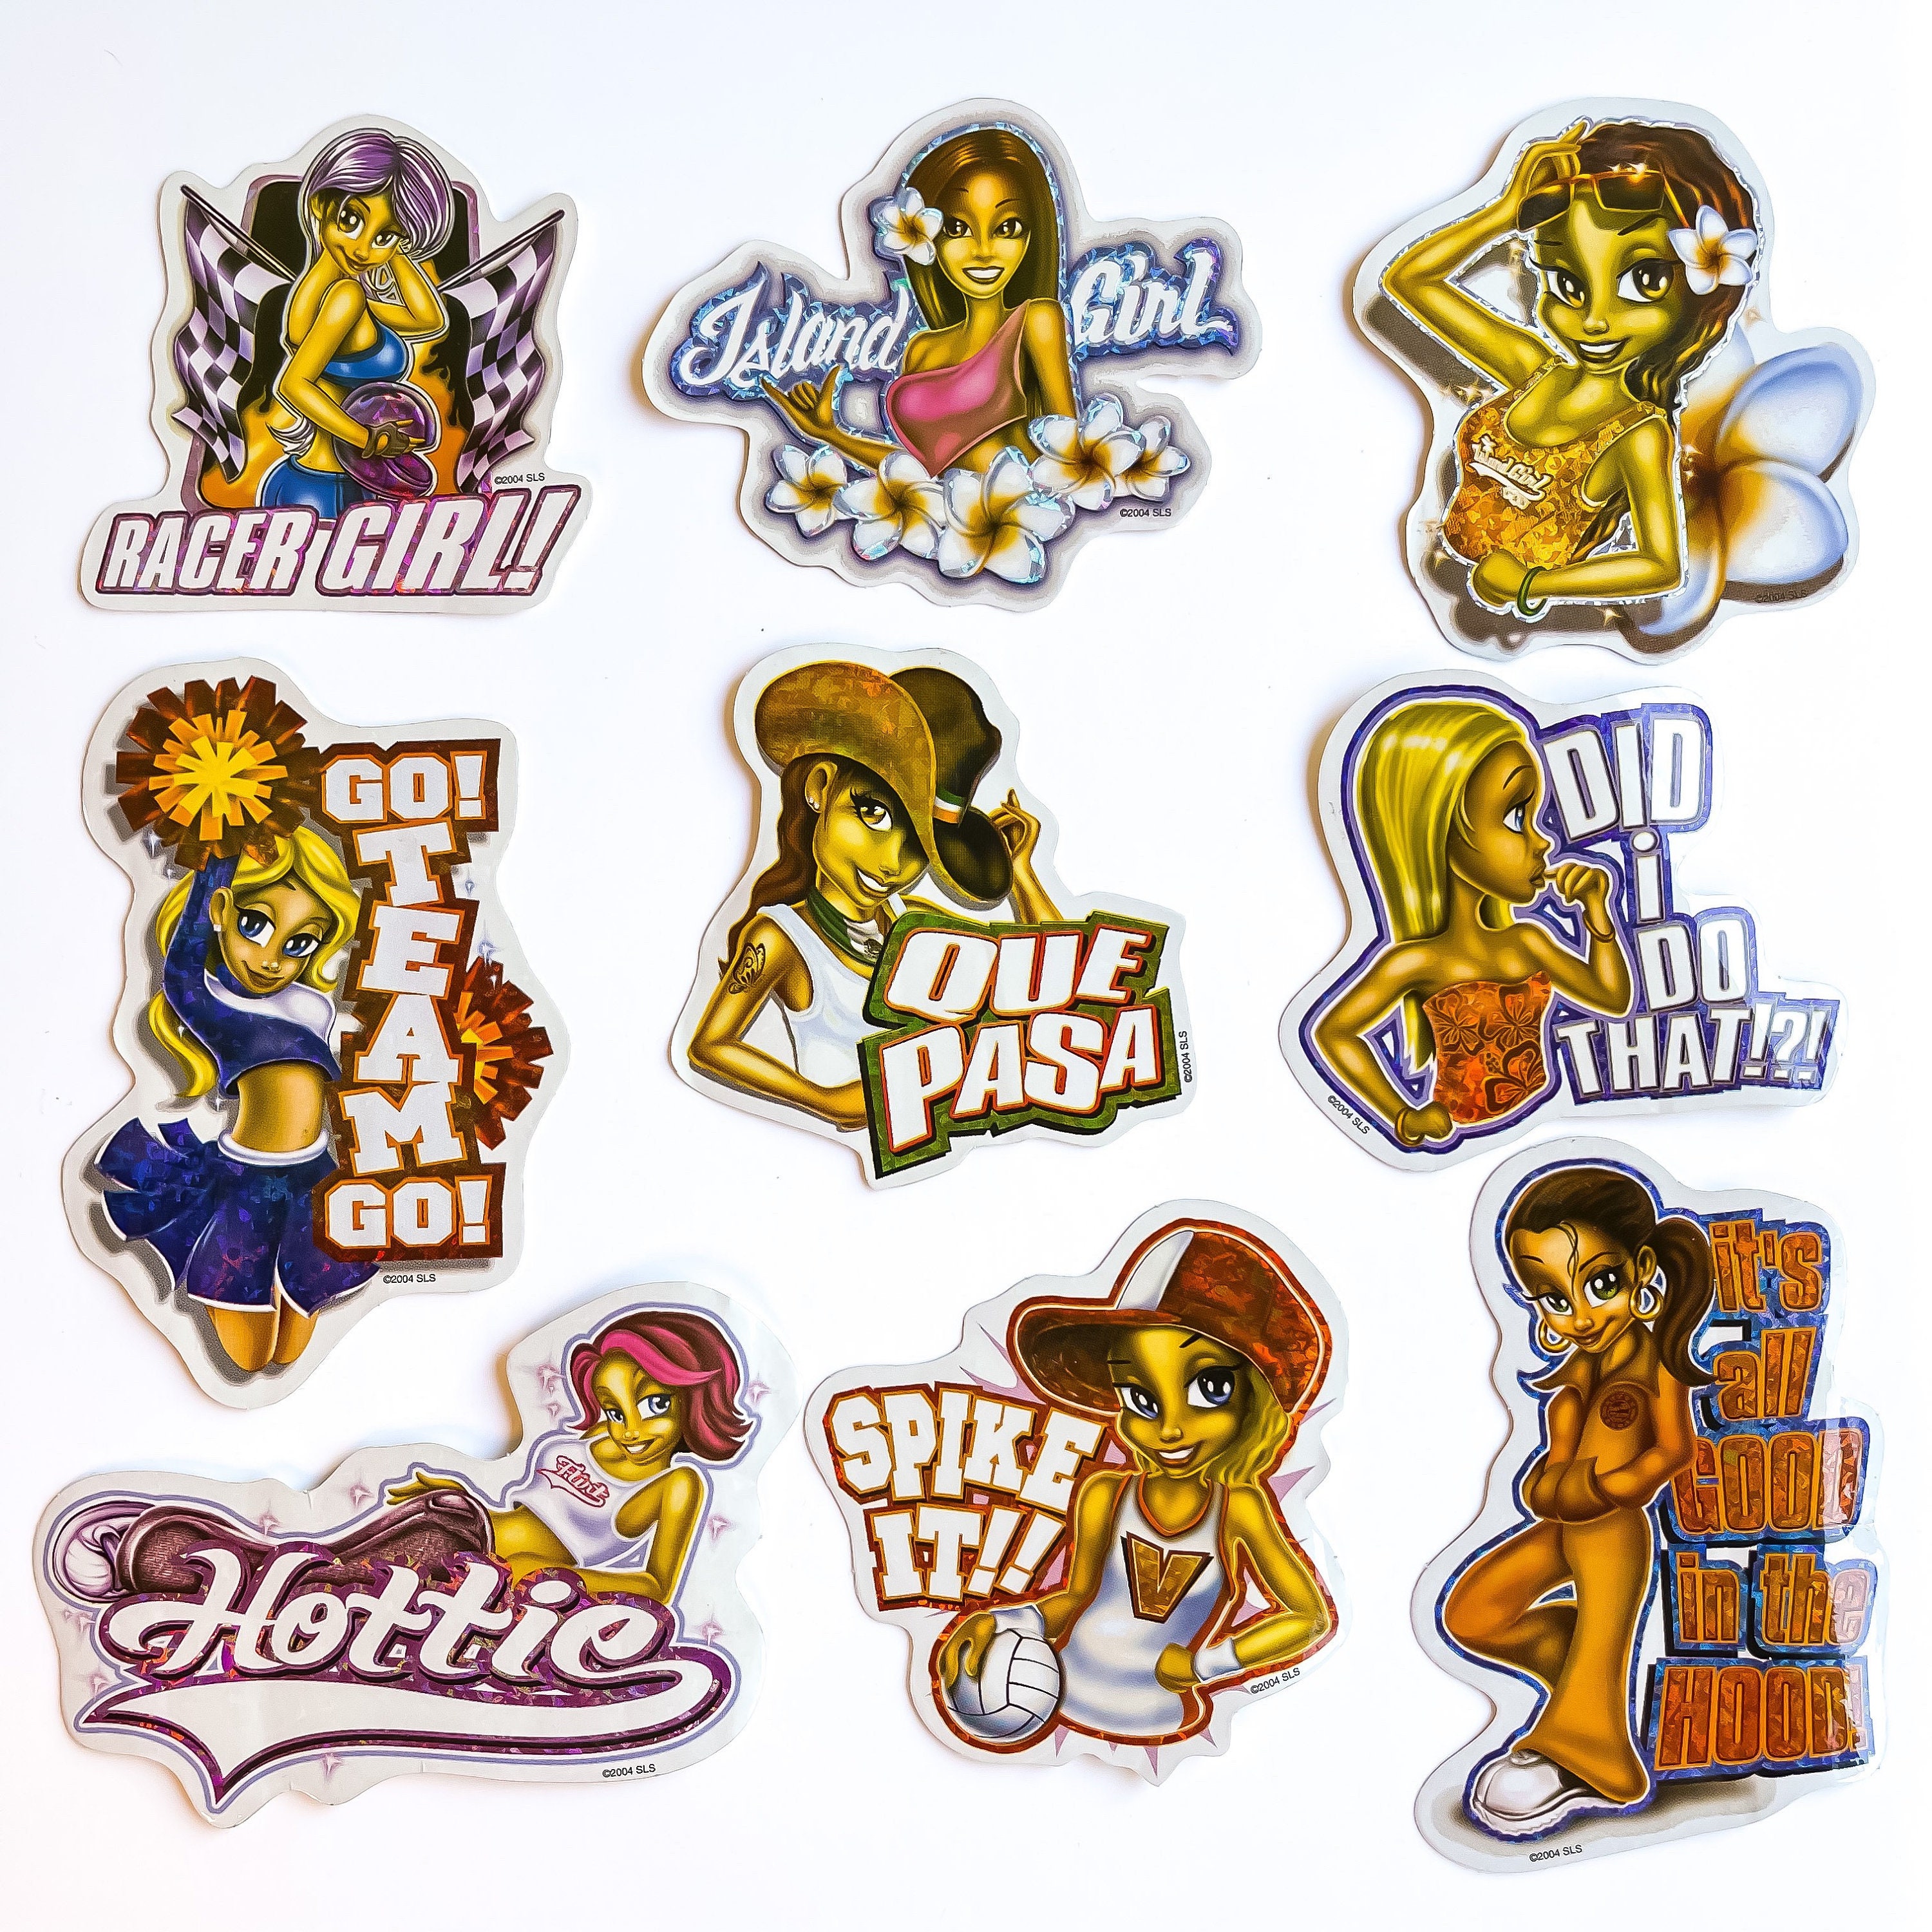 Vintage Girly Hot Shots Vending Machine Stickers From Early 2000s 